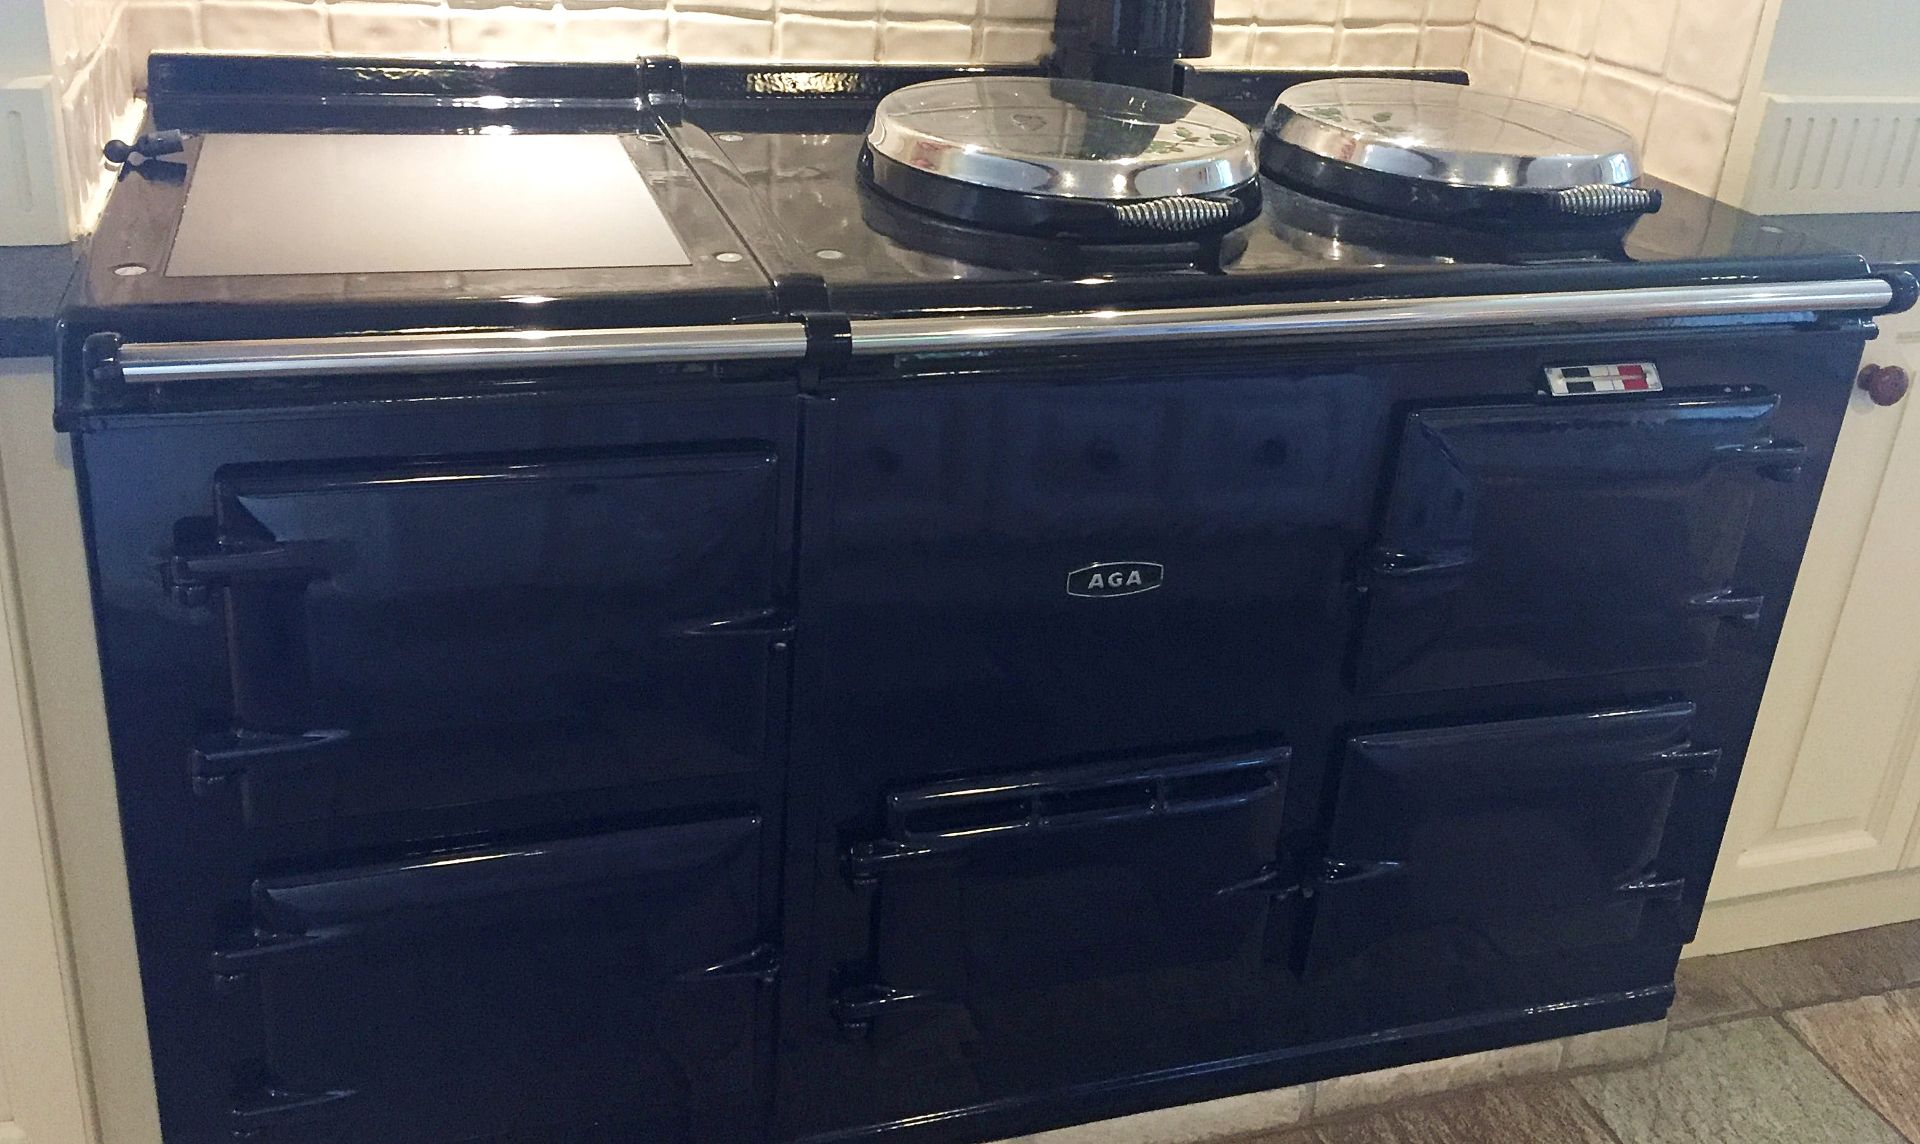 1 x Aga 4-Oven, 3-Plate Dual-Fuel Range Cooker - Cast Iron With Navy Enamel Finish With A Black